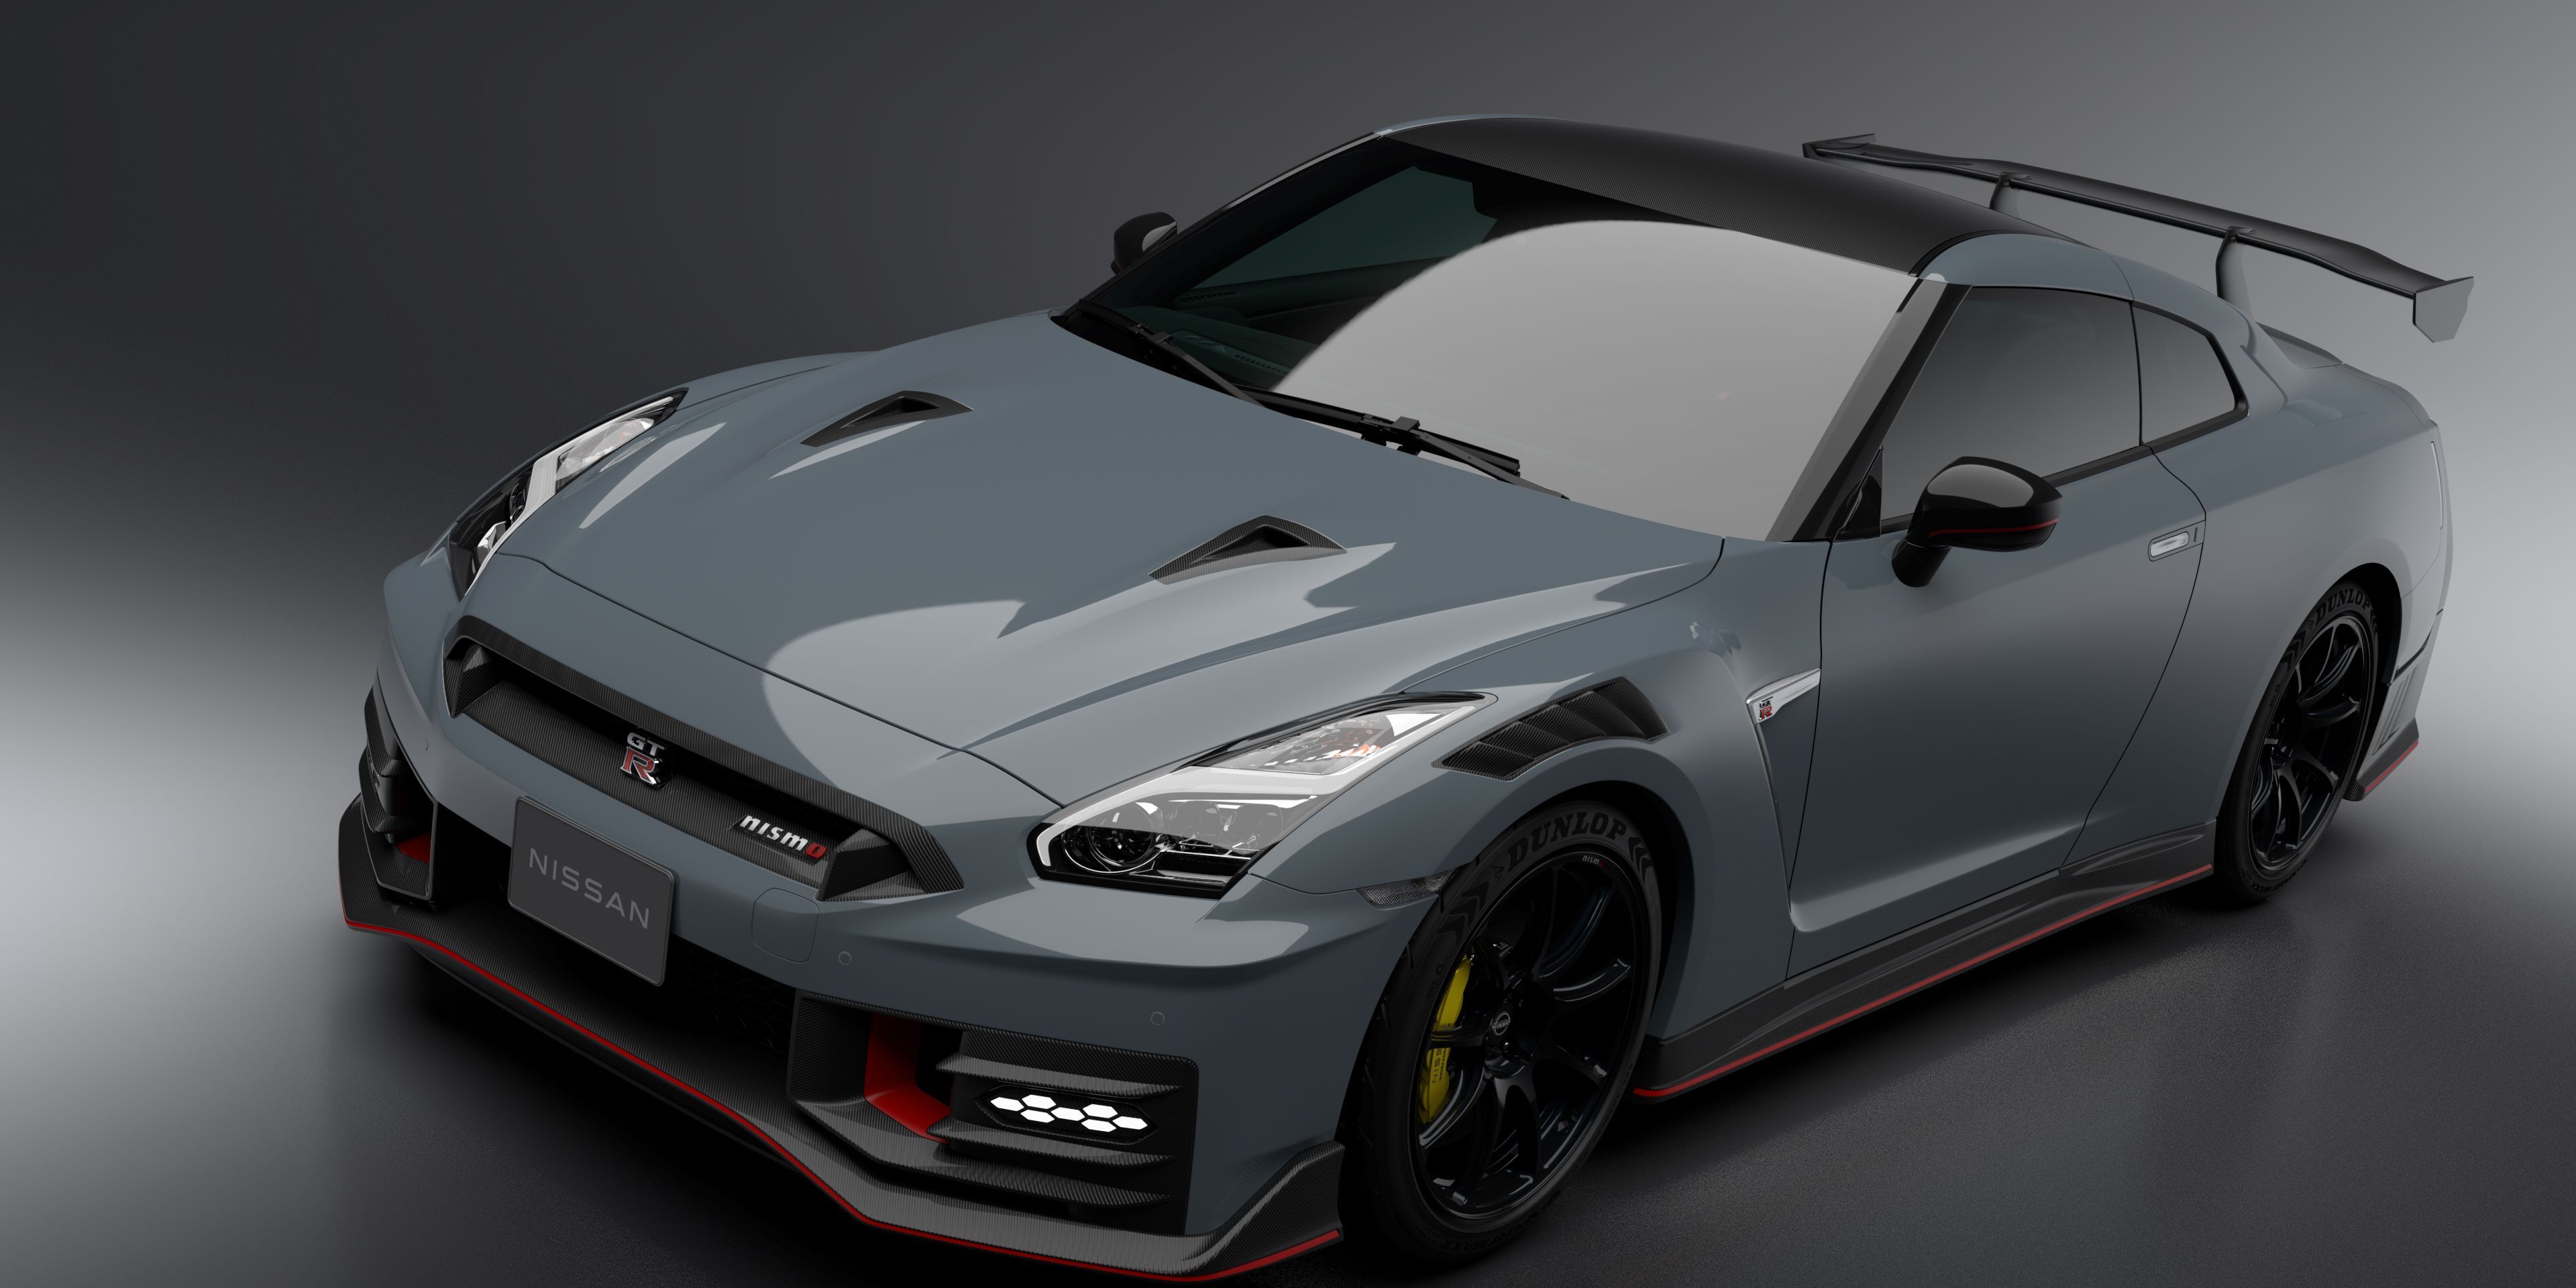 The Nissan GT-R Is Now $50,000 More Expensive Than When It First Went on Sale